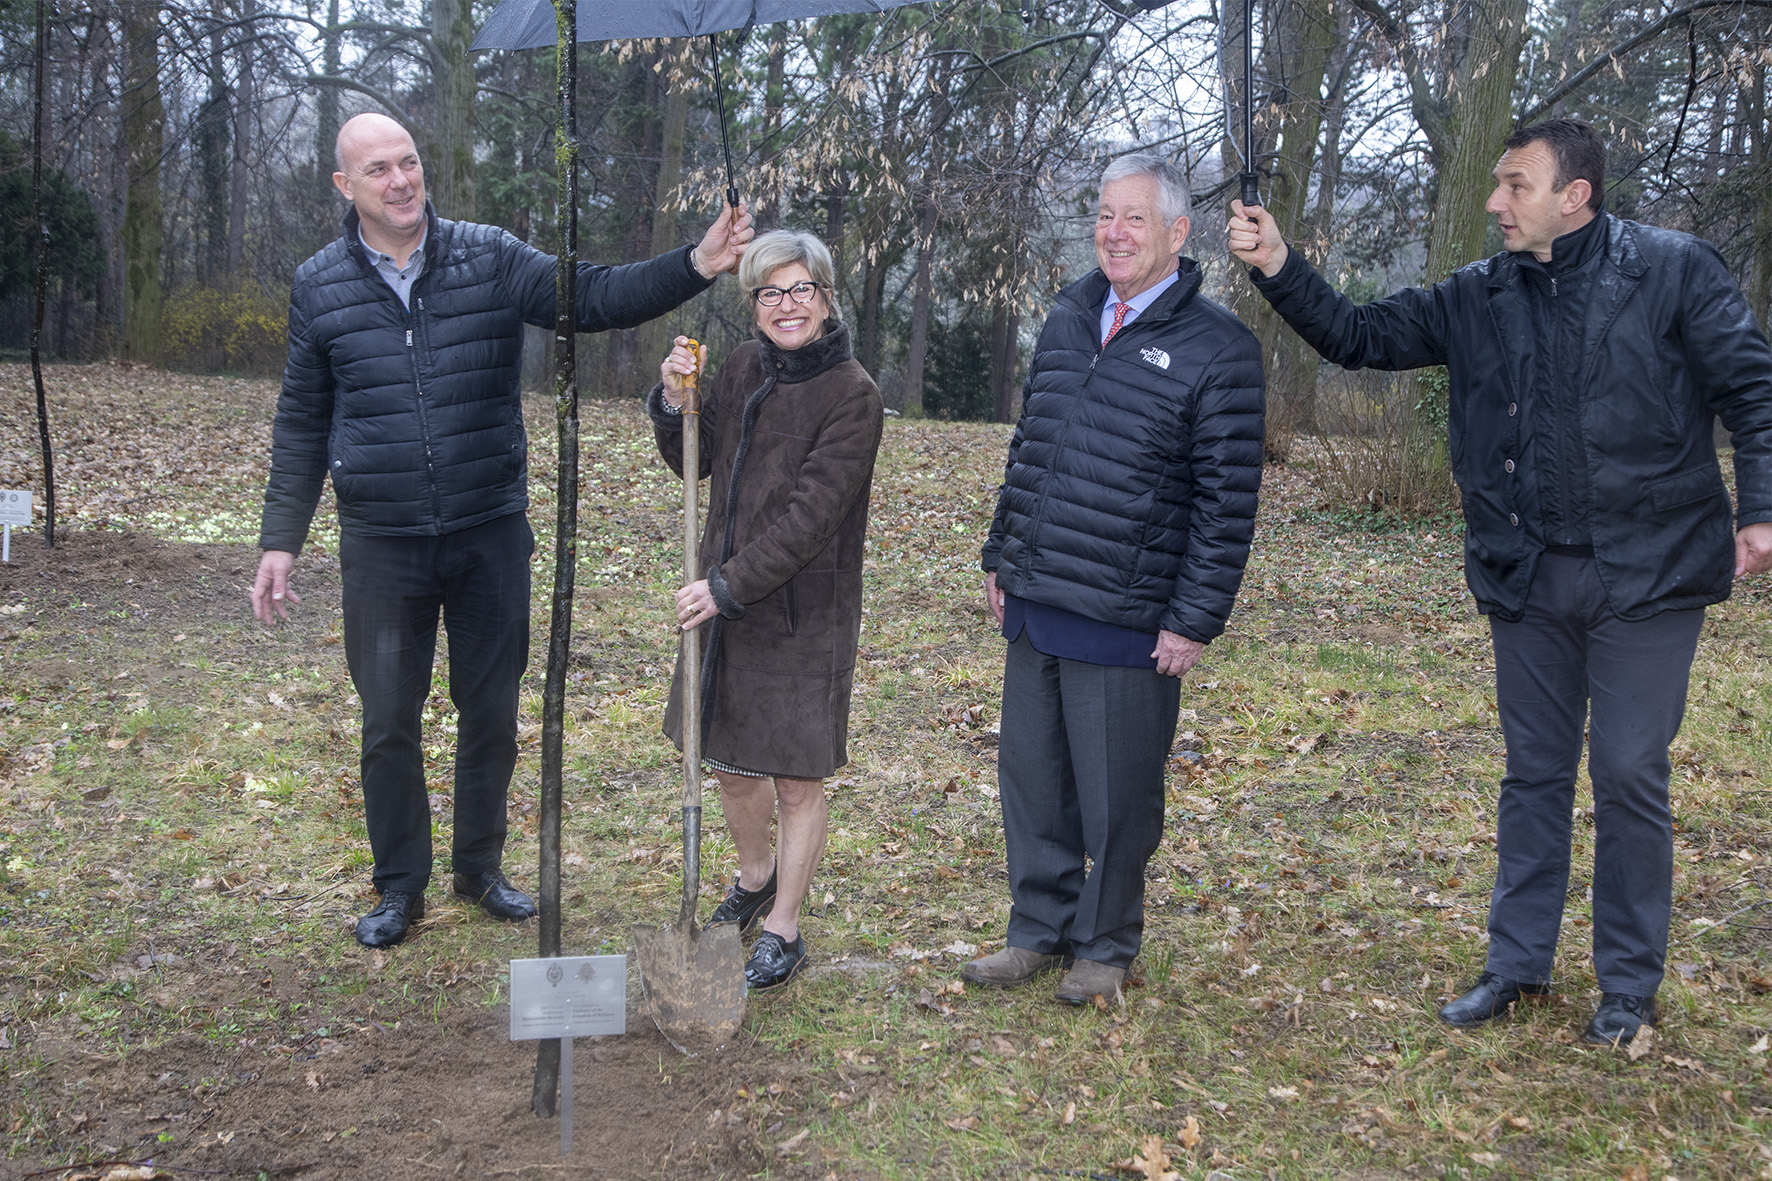 The Ambassador of the Kingdom of Belgium in Serbia, HE Mrs. Cathy Buggenhout, planting a tree at the Royal Compound